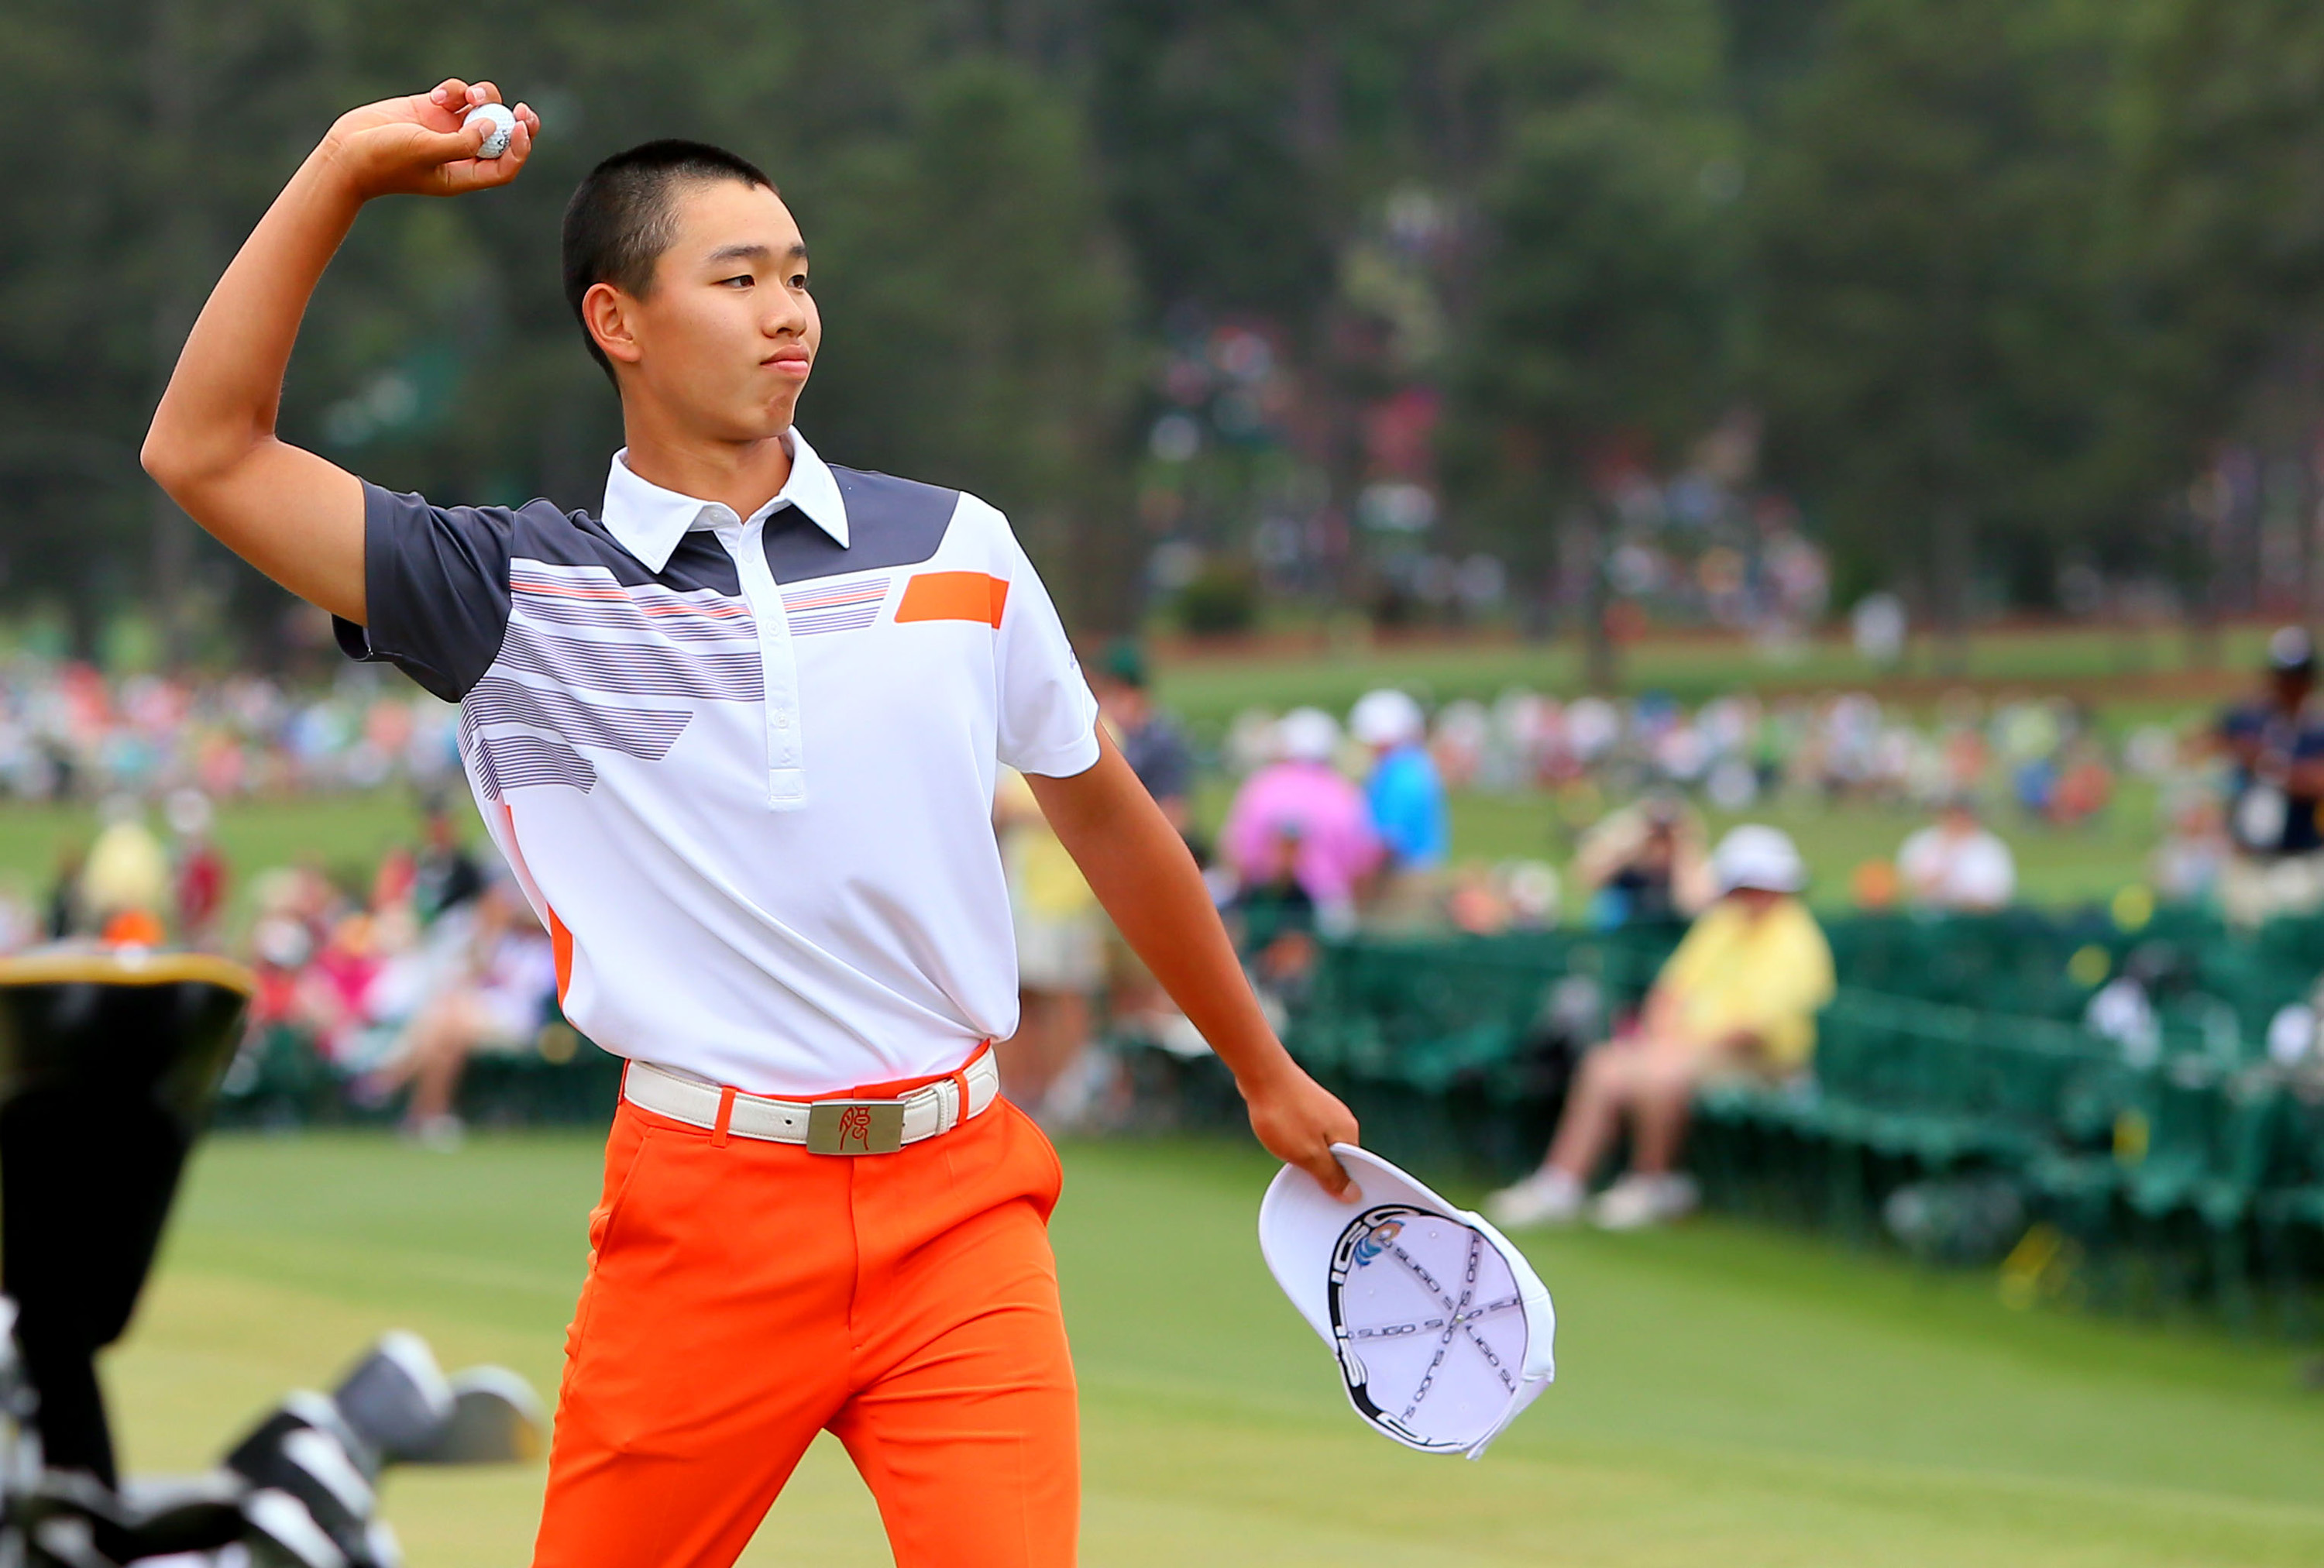 Chinese prodigy Guan Tianlang won the 2012 Asia-Pacific Amateur Championship and then took the world by storm at the 2013 Masters in Augusta. Photo: MCT